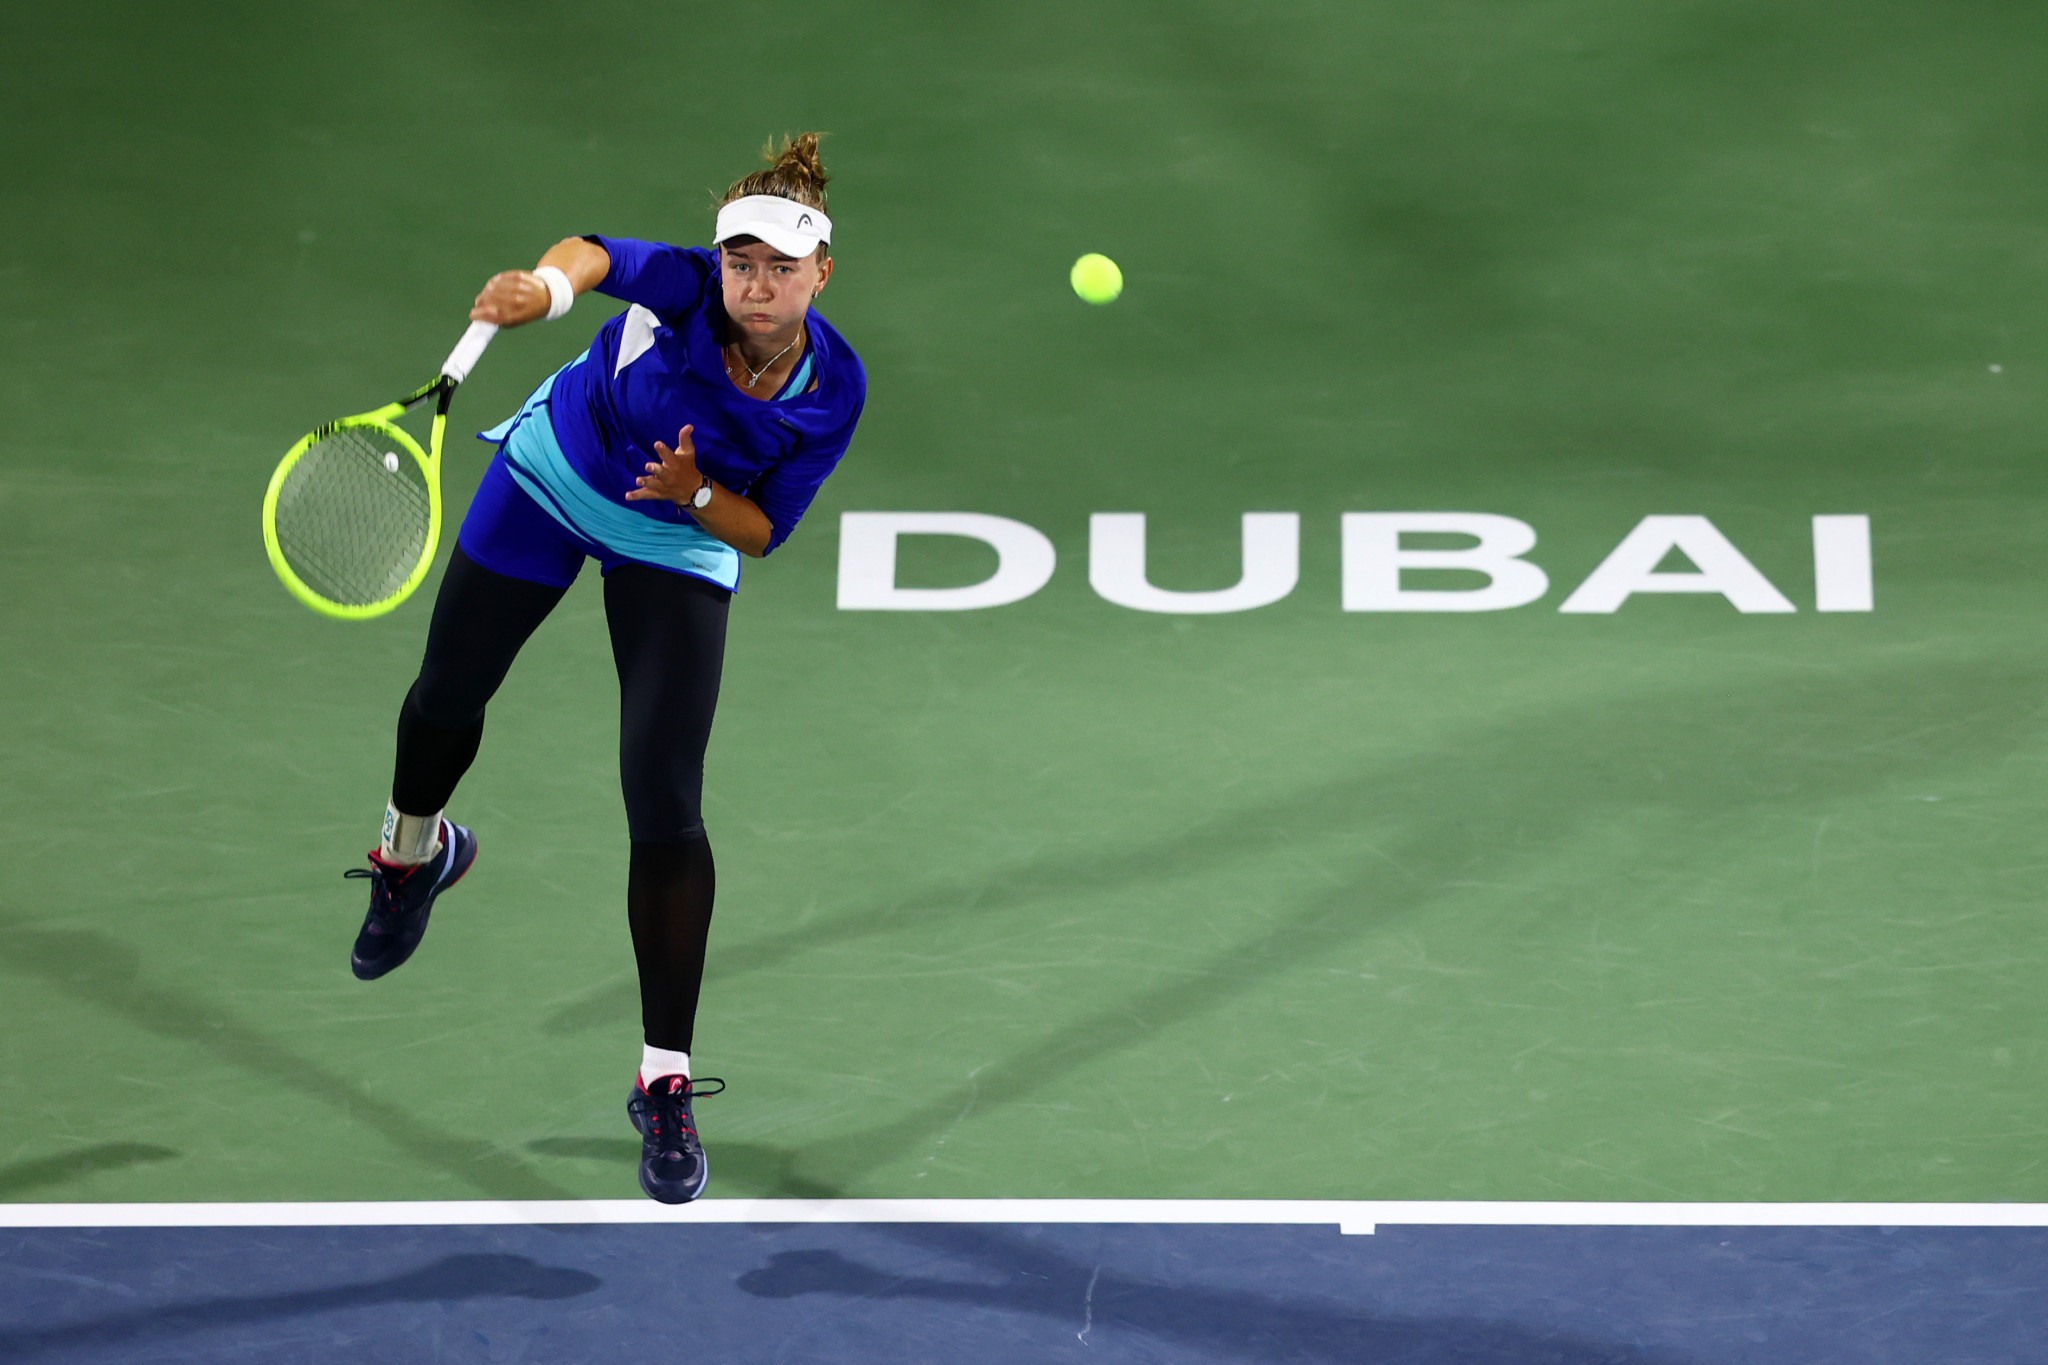 World number 59 Krejcikova battled hard but was beaten in straight sets by Muguruza in the final of the WTA 1000 tournament in Dubai ©Getty Images